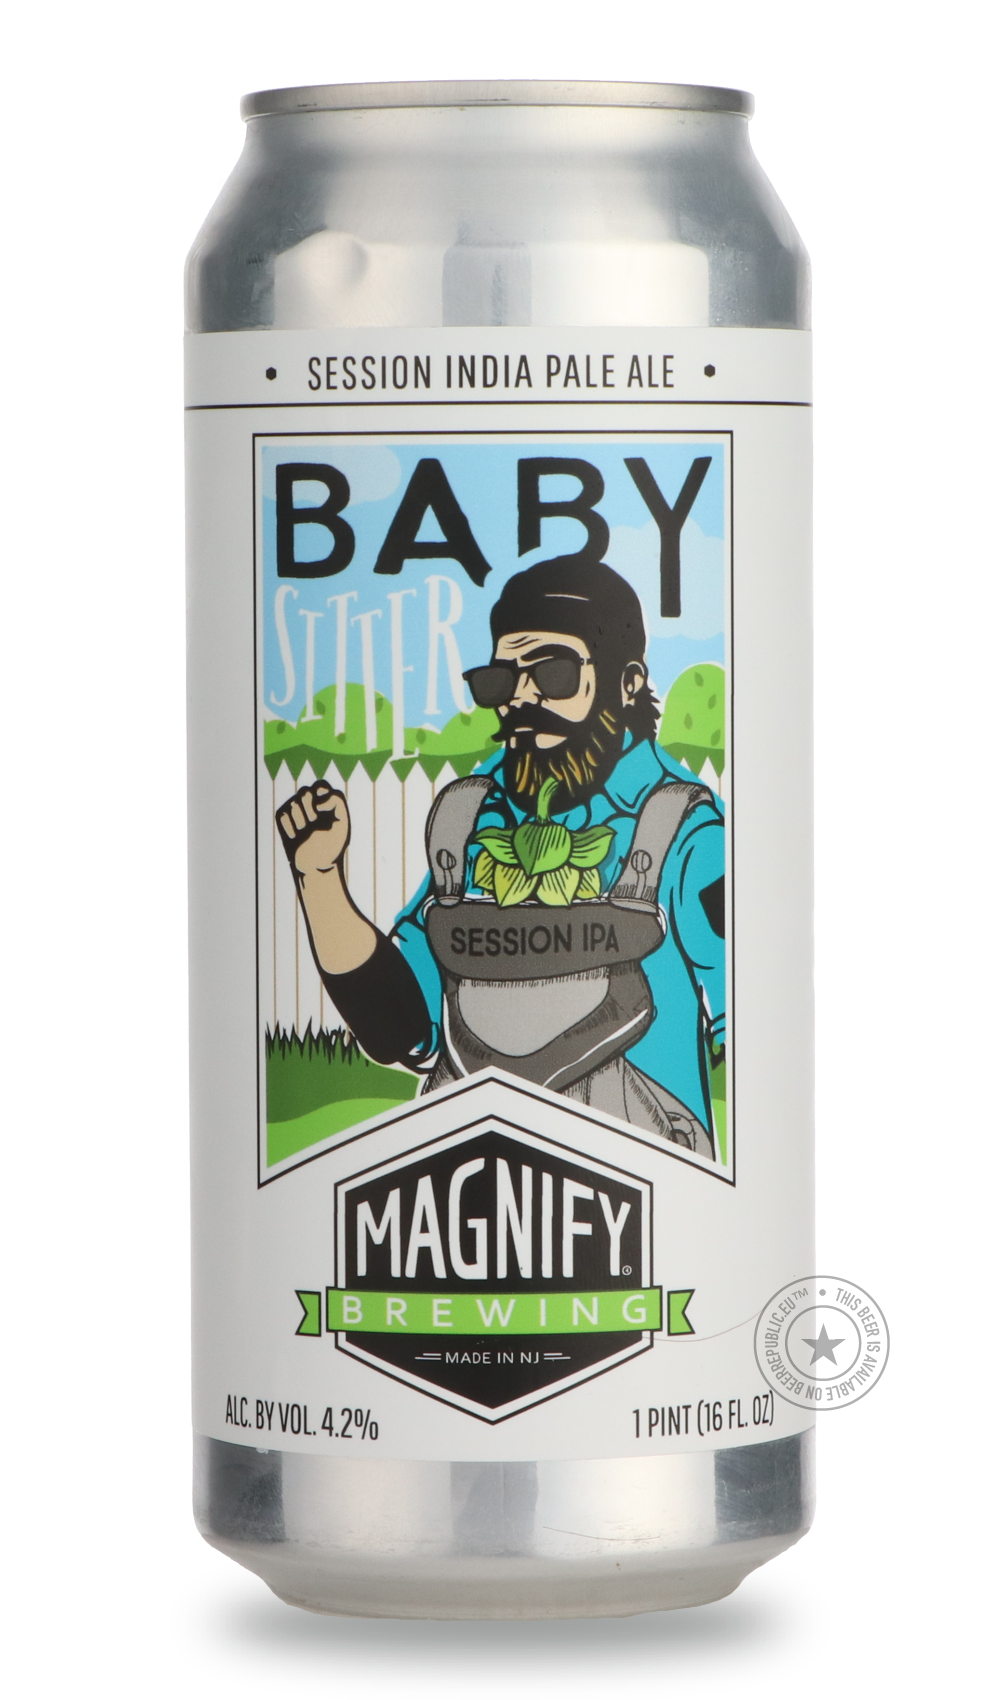 -Magnify- Babysitter-IPA- Only @ Beer Republic - The best online beer store for American & Canadian craft beer - Buy beer online from the USA and Canada - Bier online kopen - Amerikaans bier kopen - Craft beer store - Craft beer kopen - Amerikanisch bier kaufen - Bier online kaufen - Acheter biere online - IPA - Stout - Porter - New England IPA - Hazy IPA - Imperial Stout - Barrel Aged - Barrel Aged Imperial Stout - Brown - Dark beer - Blond - Blonde - Pilsner - Lager - Wheat - Weizen - Amber - Barley Wine 